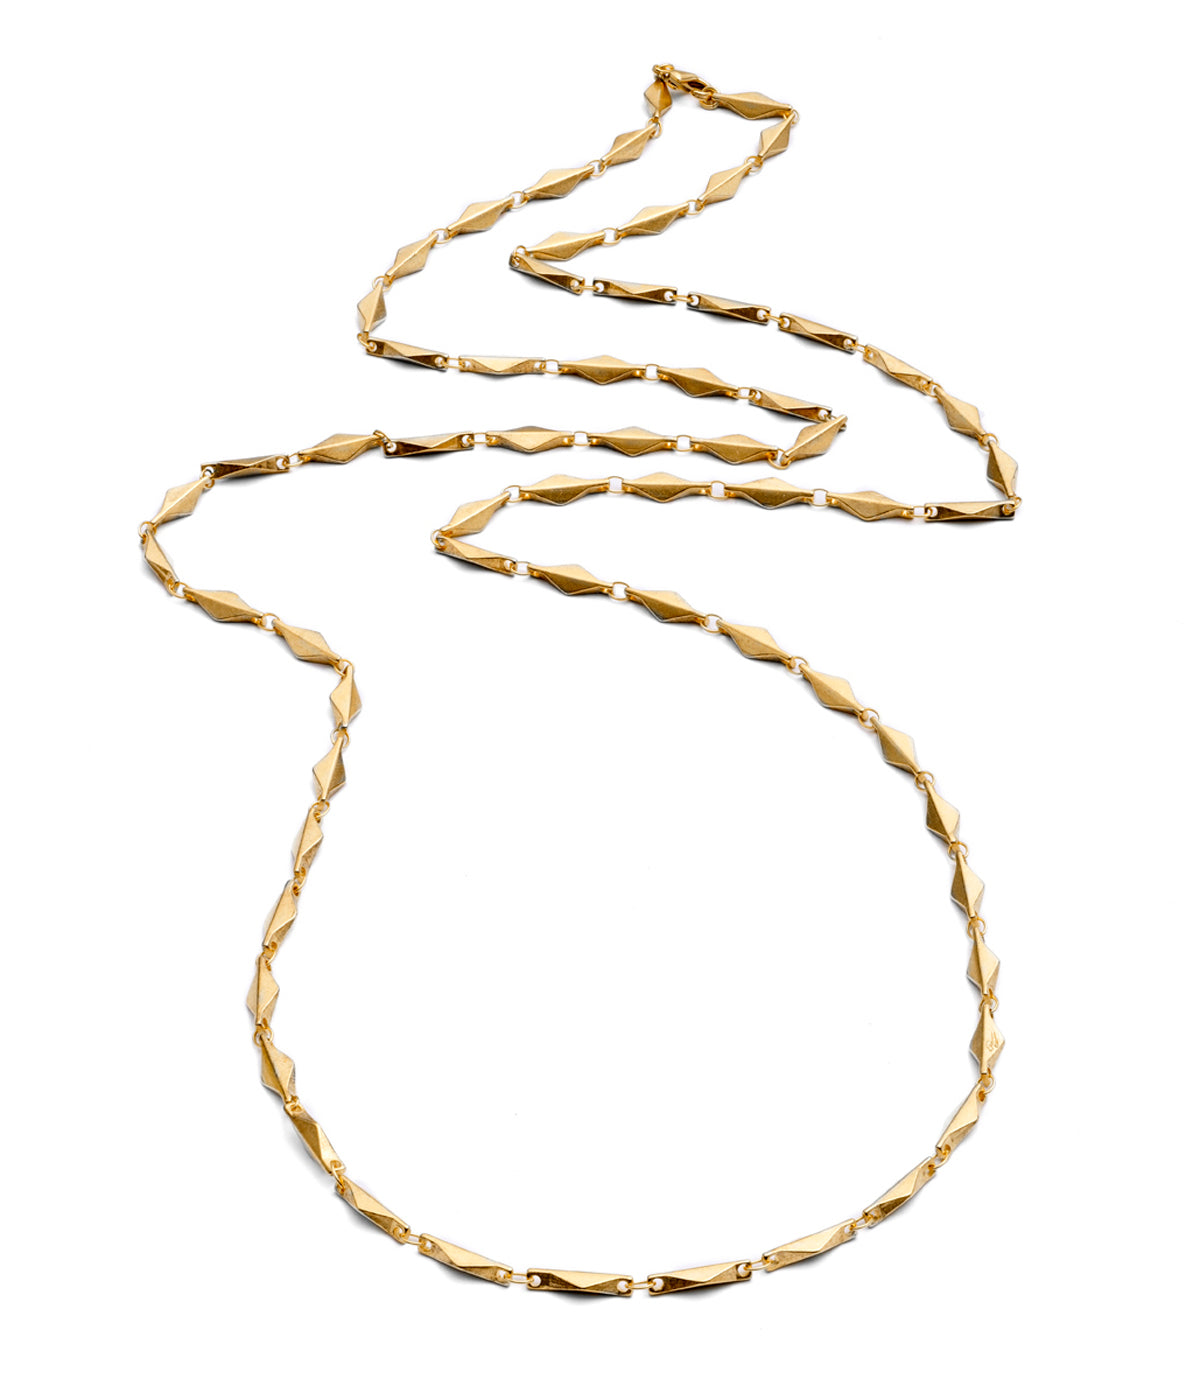 Paola Chain - Mirabelle Jewellery